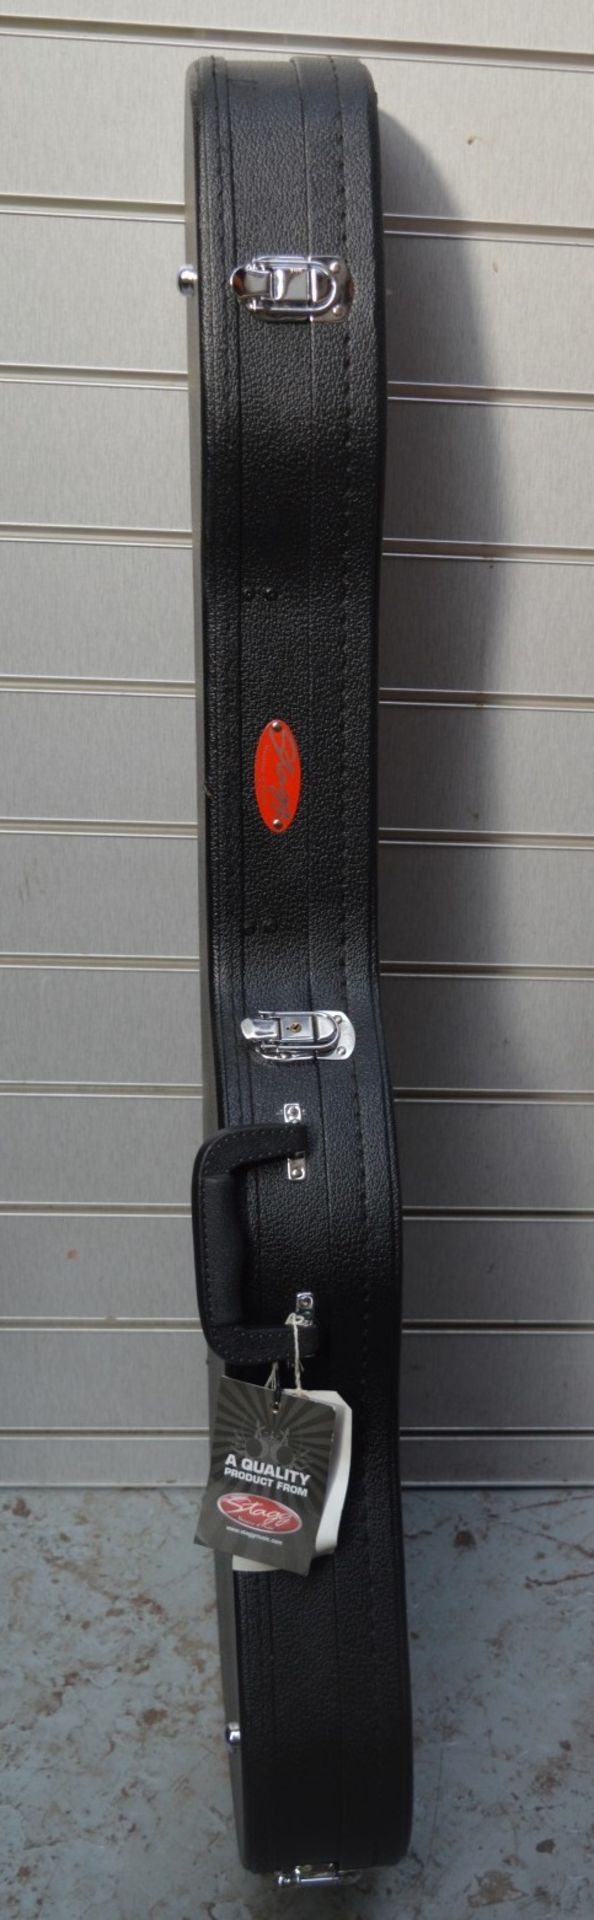 1 x Stagg Basic Electric Hardshell Shaped Guitar Case - CL020 - Ref Pro97 - Location: Altrincham - Image 4 of 8